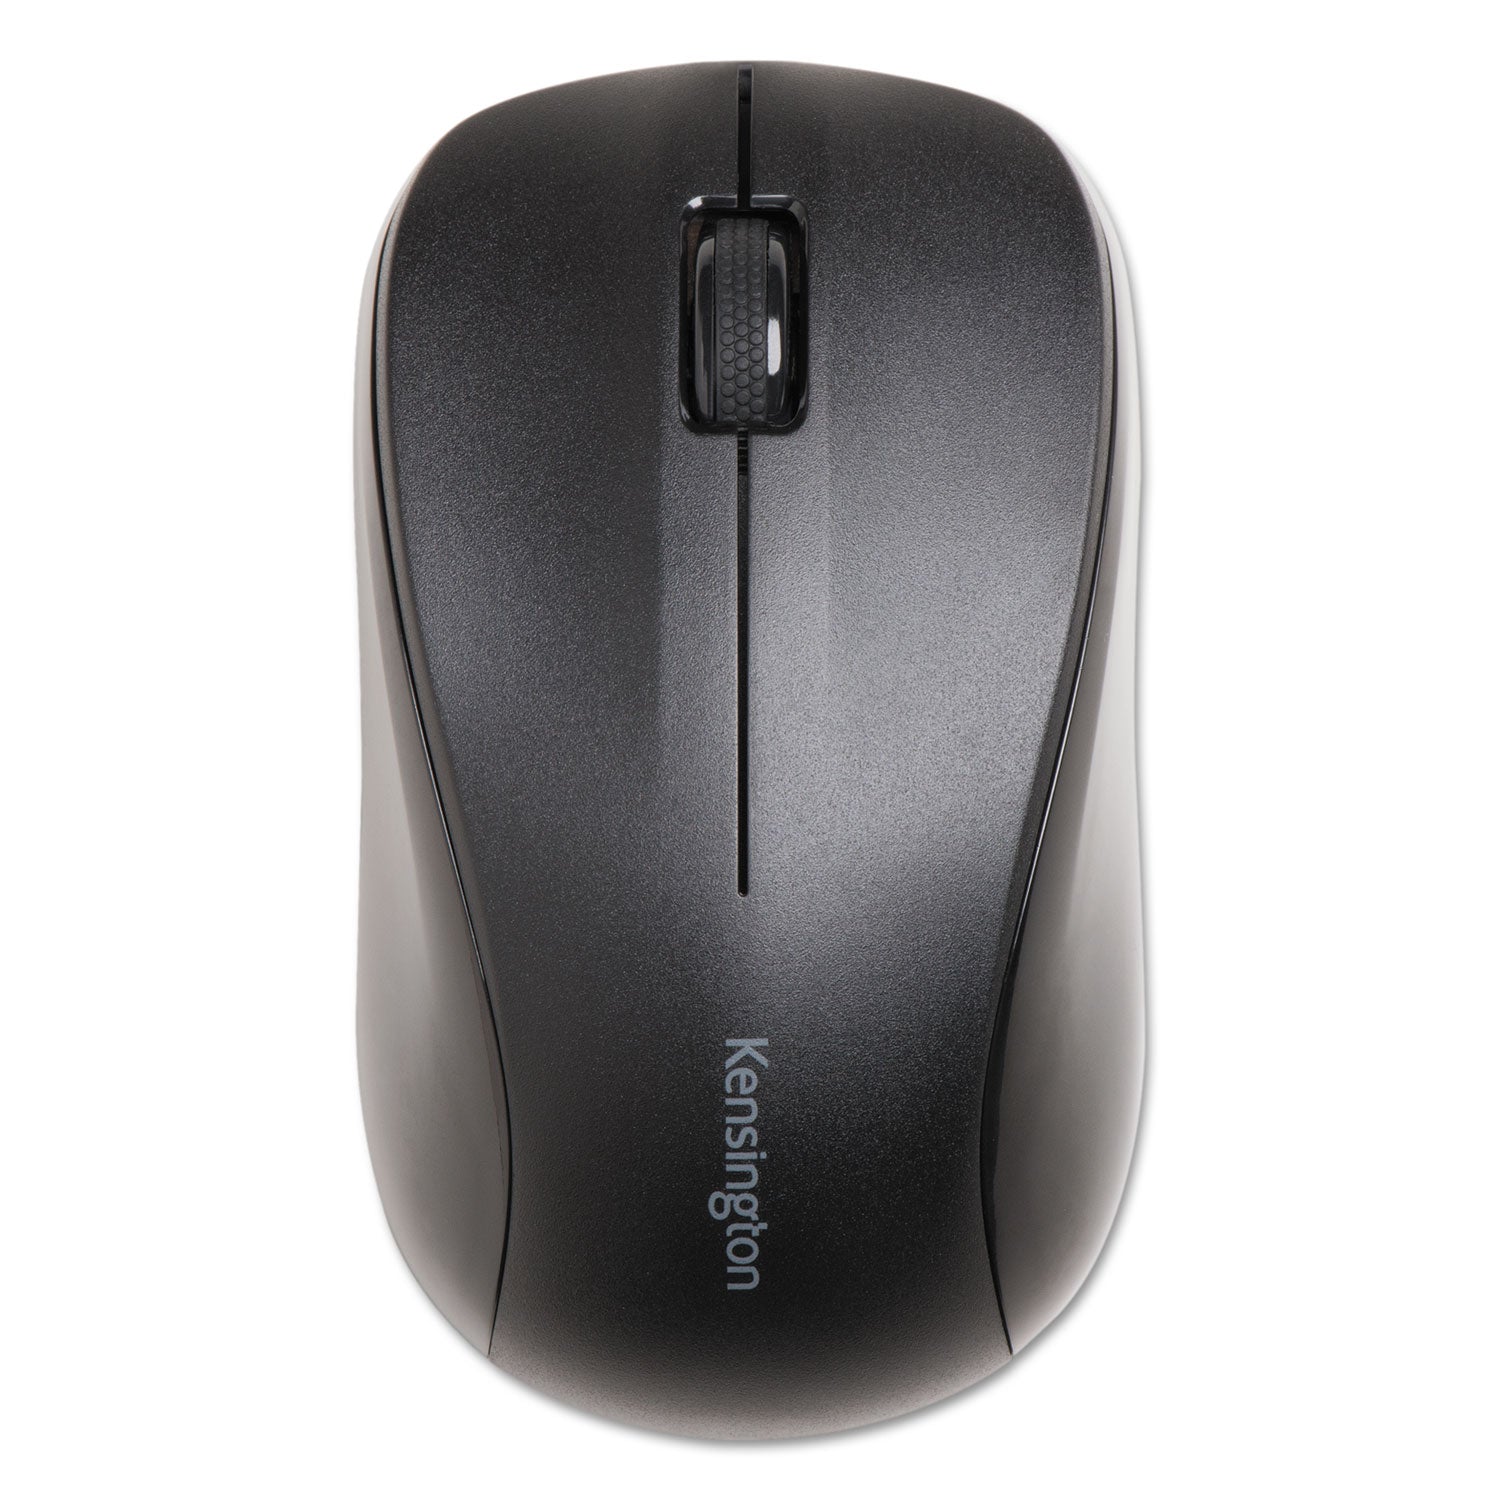 Wireless Mouse for Life, 2.4 GHz Frequency/30 ft Wireless Range, Left/Right Hand Use, Black - 